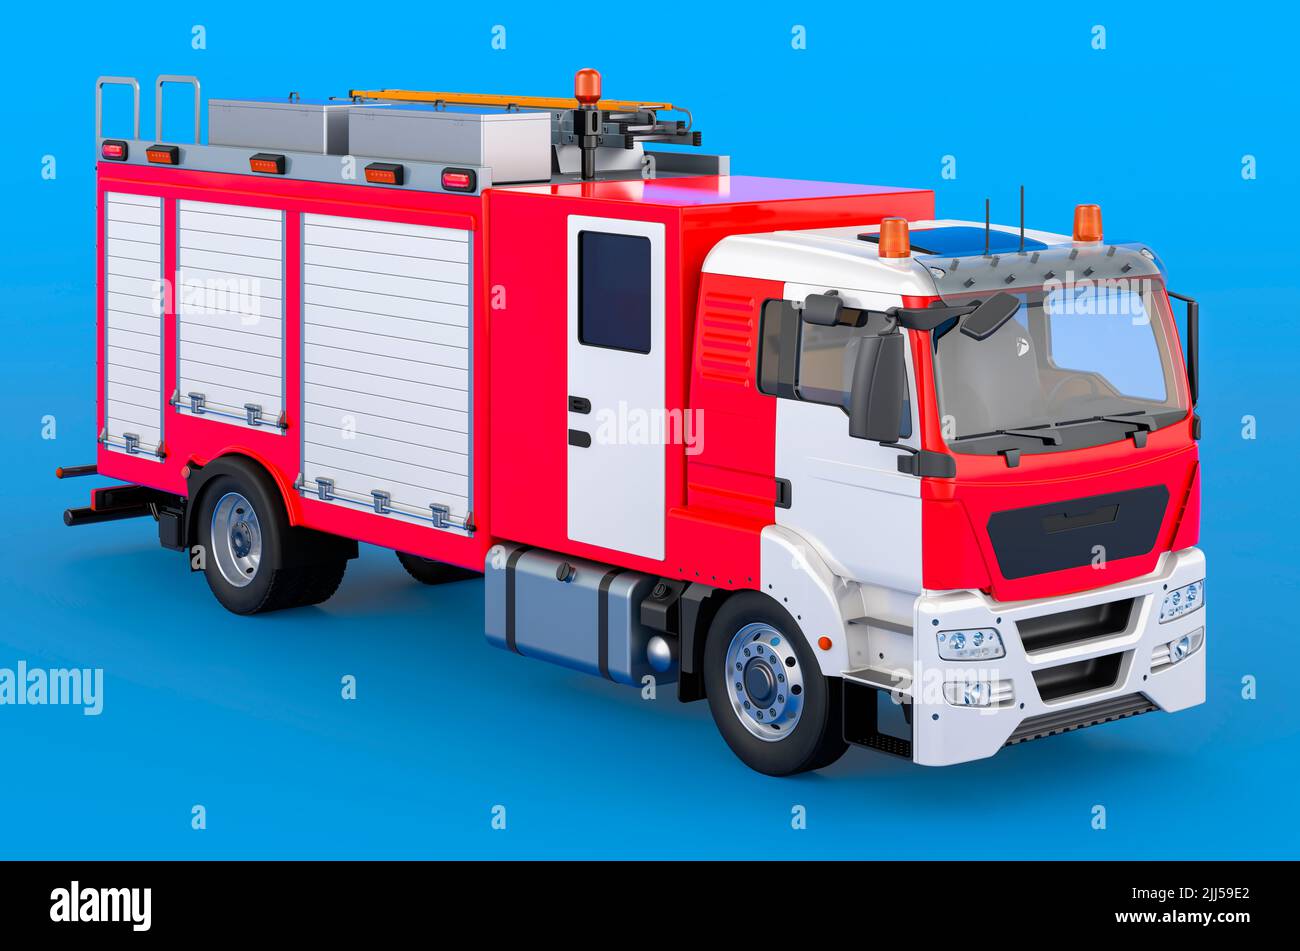 Fire engine truck on blue backdrop, 3D rendering Stock Photo